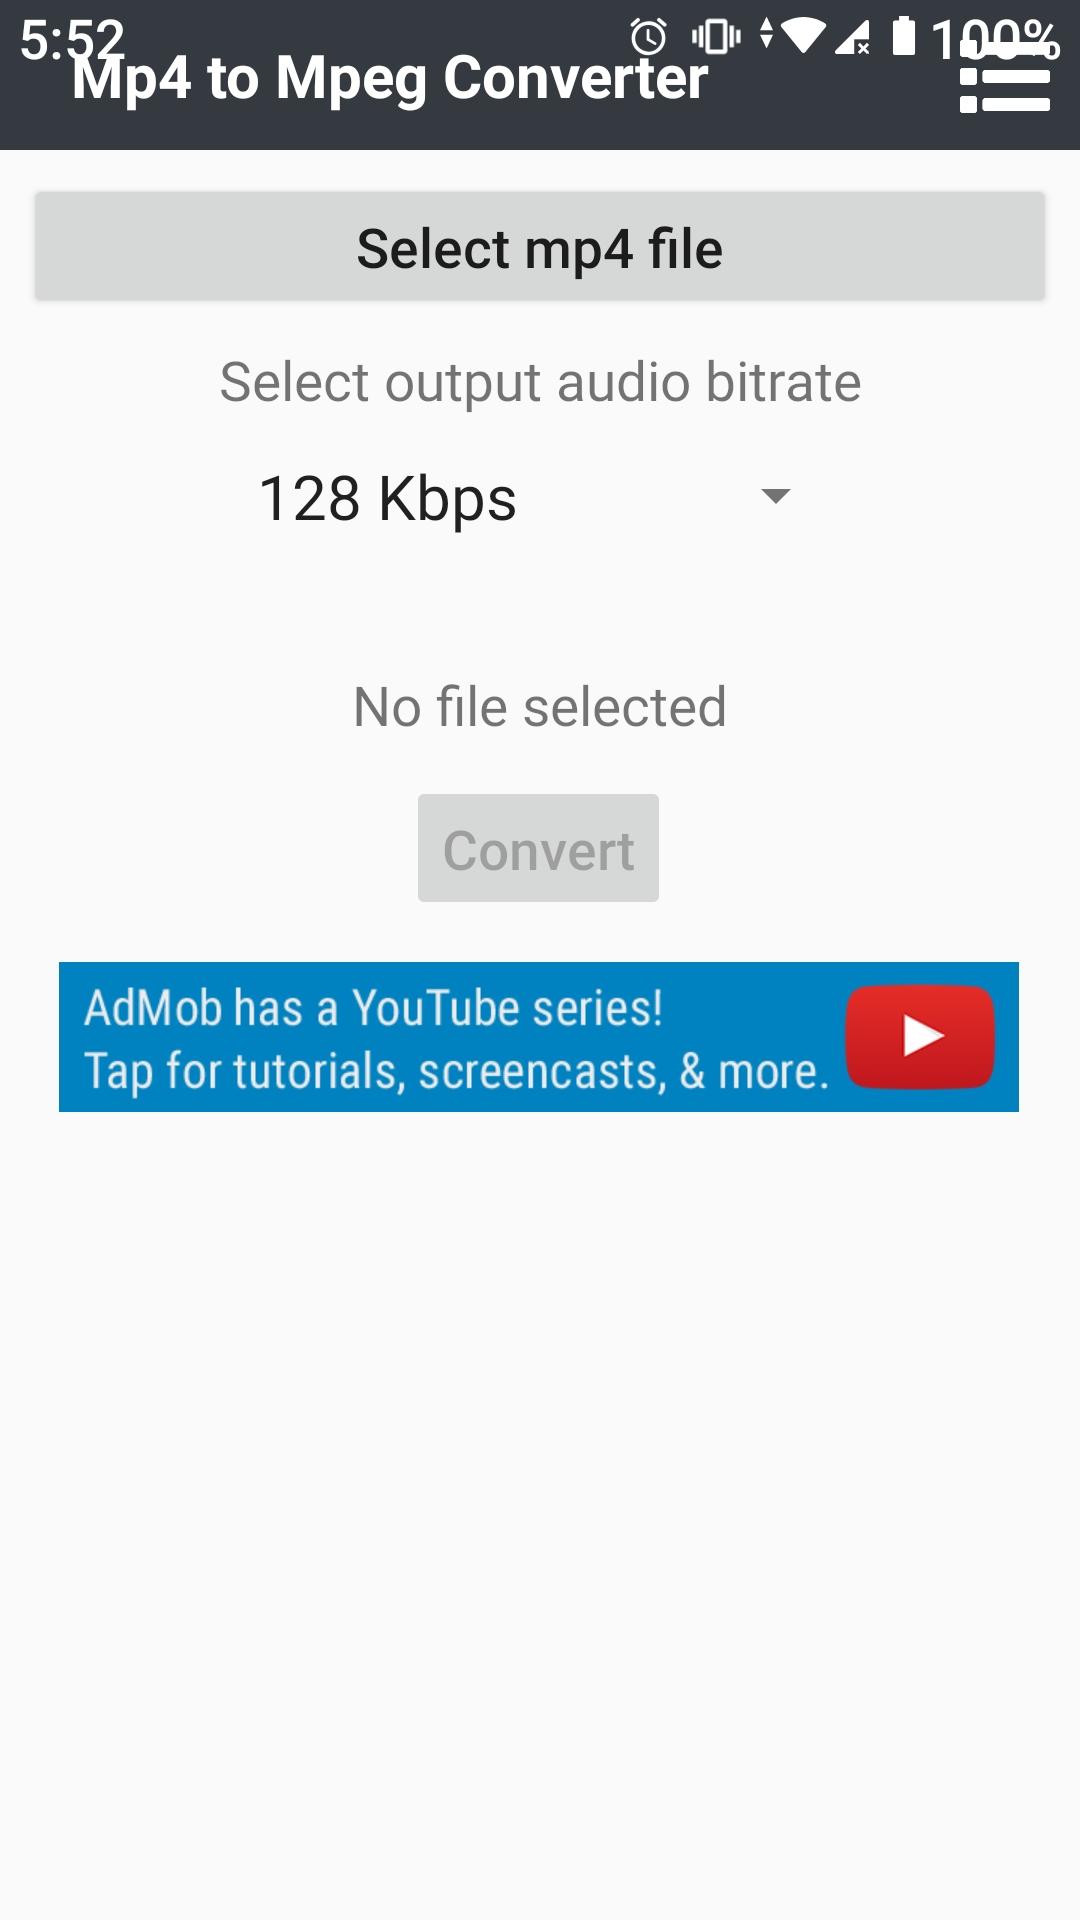 MP4 to MPEG Converter APK 4.0 for Android – Download MP4 to MPEG Converter  APK Latest Version from APKFab.com